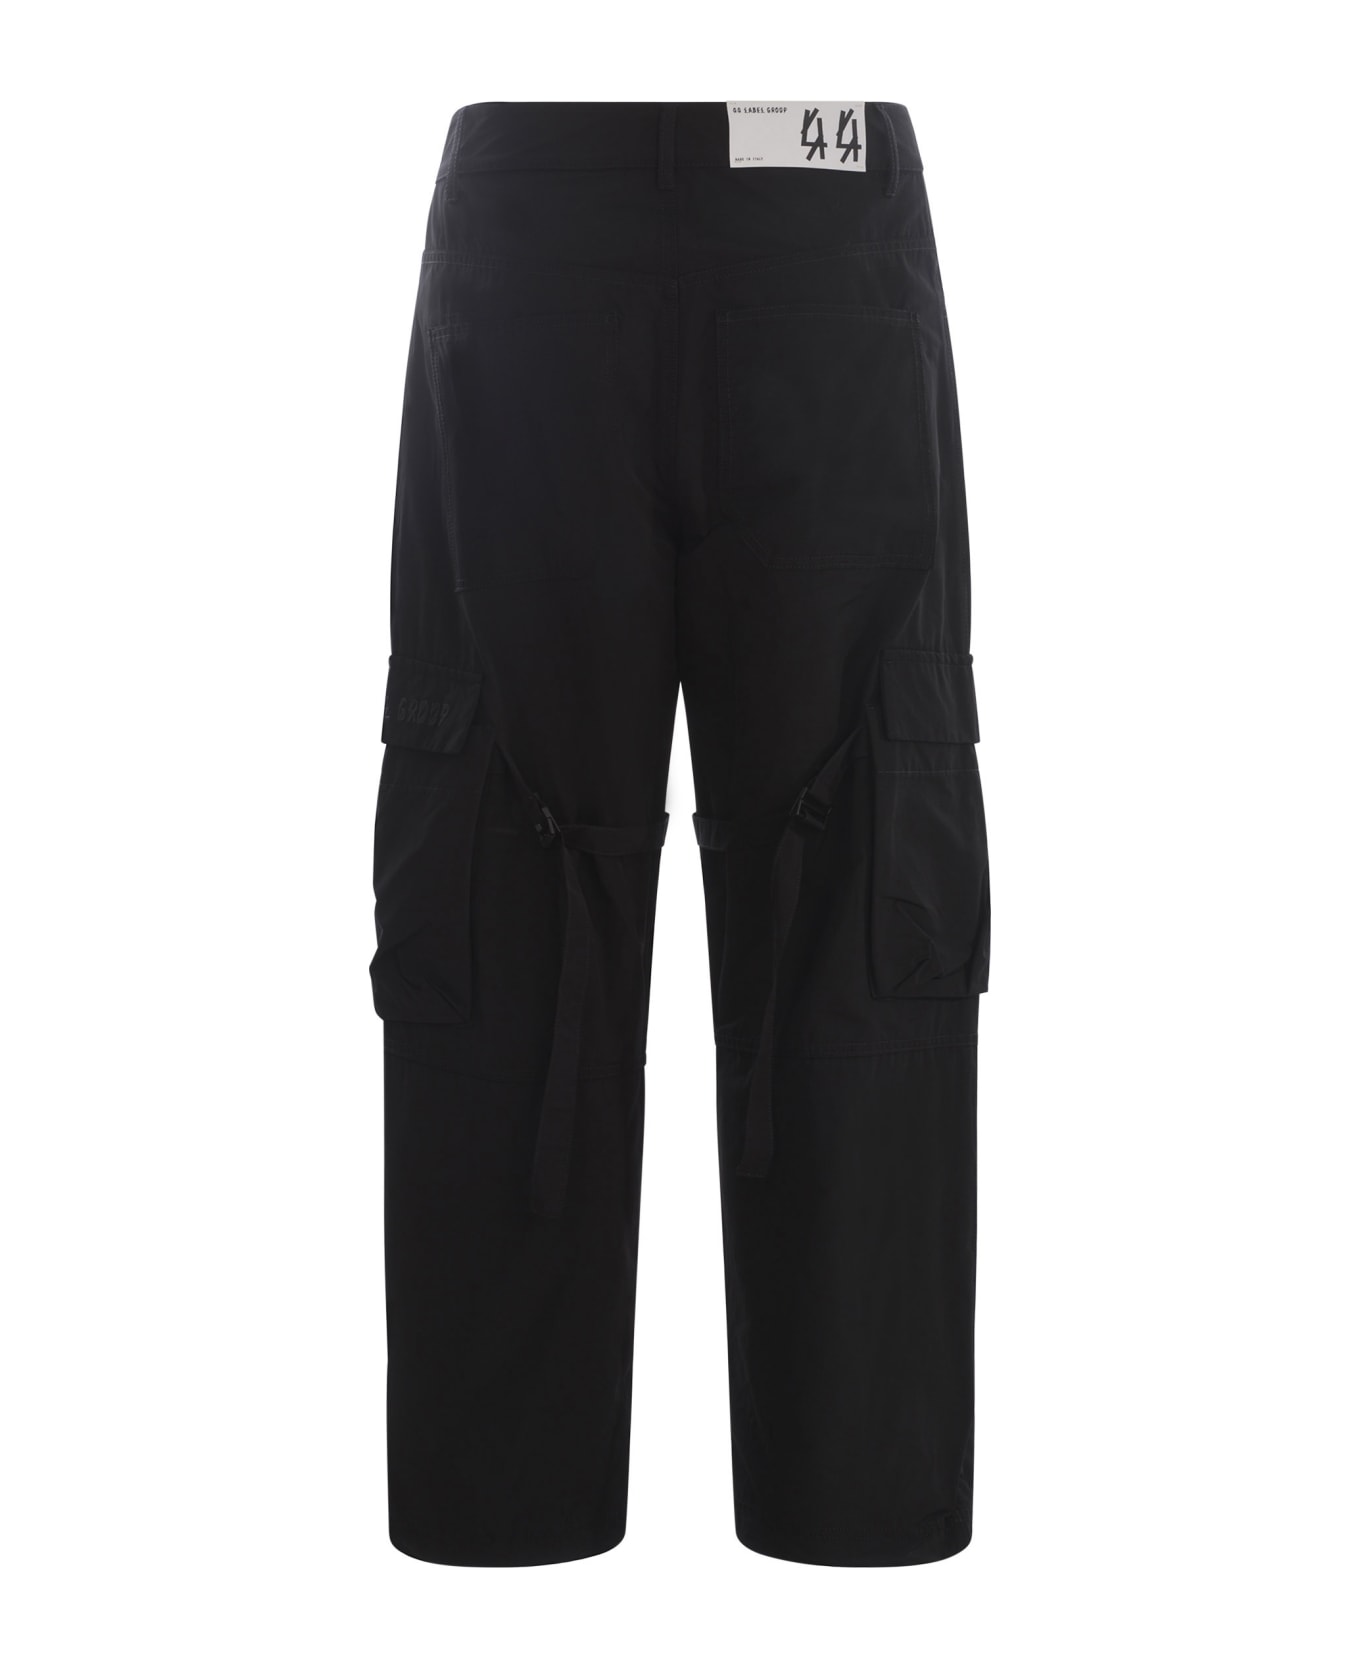 44 Label Group Trousers 44label Group In Cotton Blend - Nero